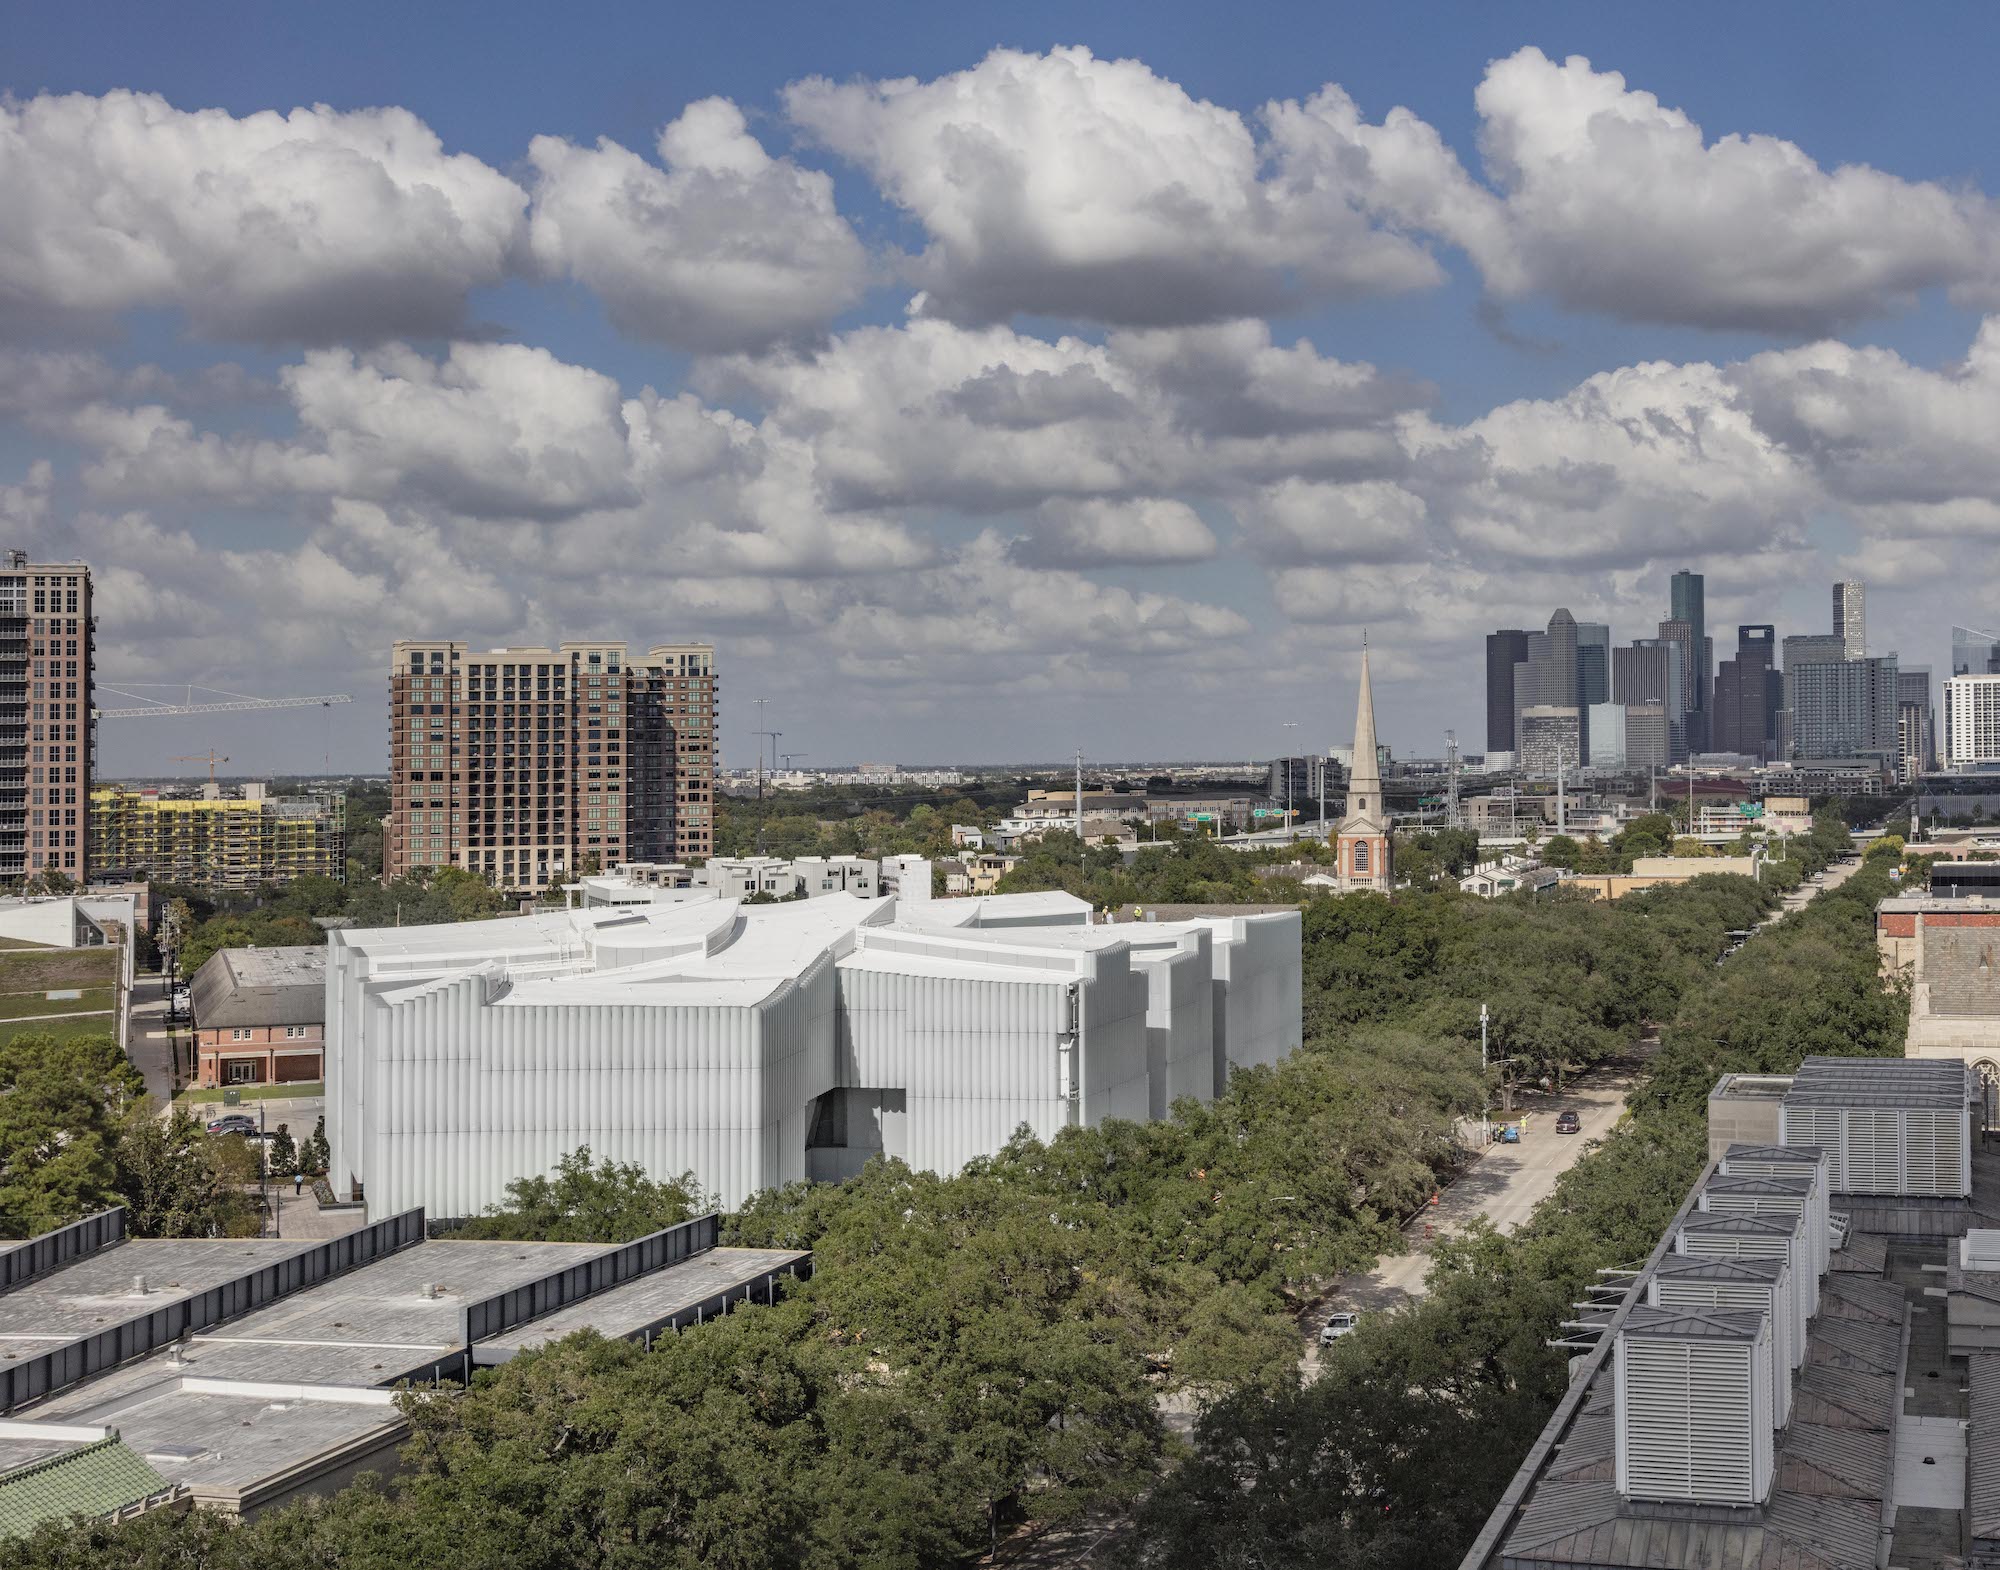 The Nancy and Rich Kinder Building for modern and contemporary art at the Museum of Fine Arts, Houston. Photograph: Richard Barnes.